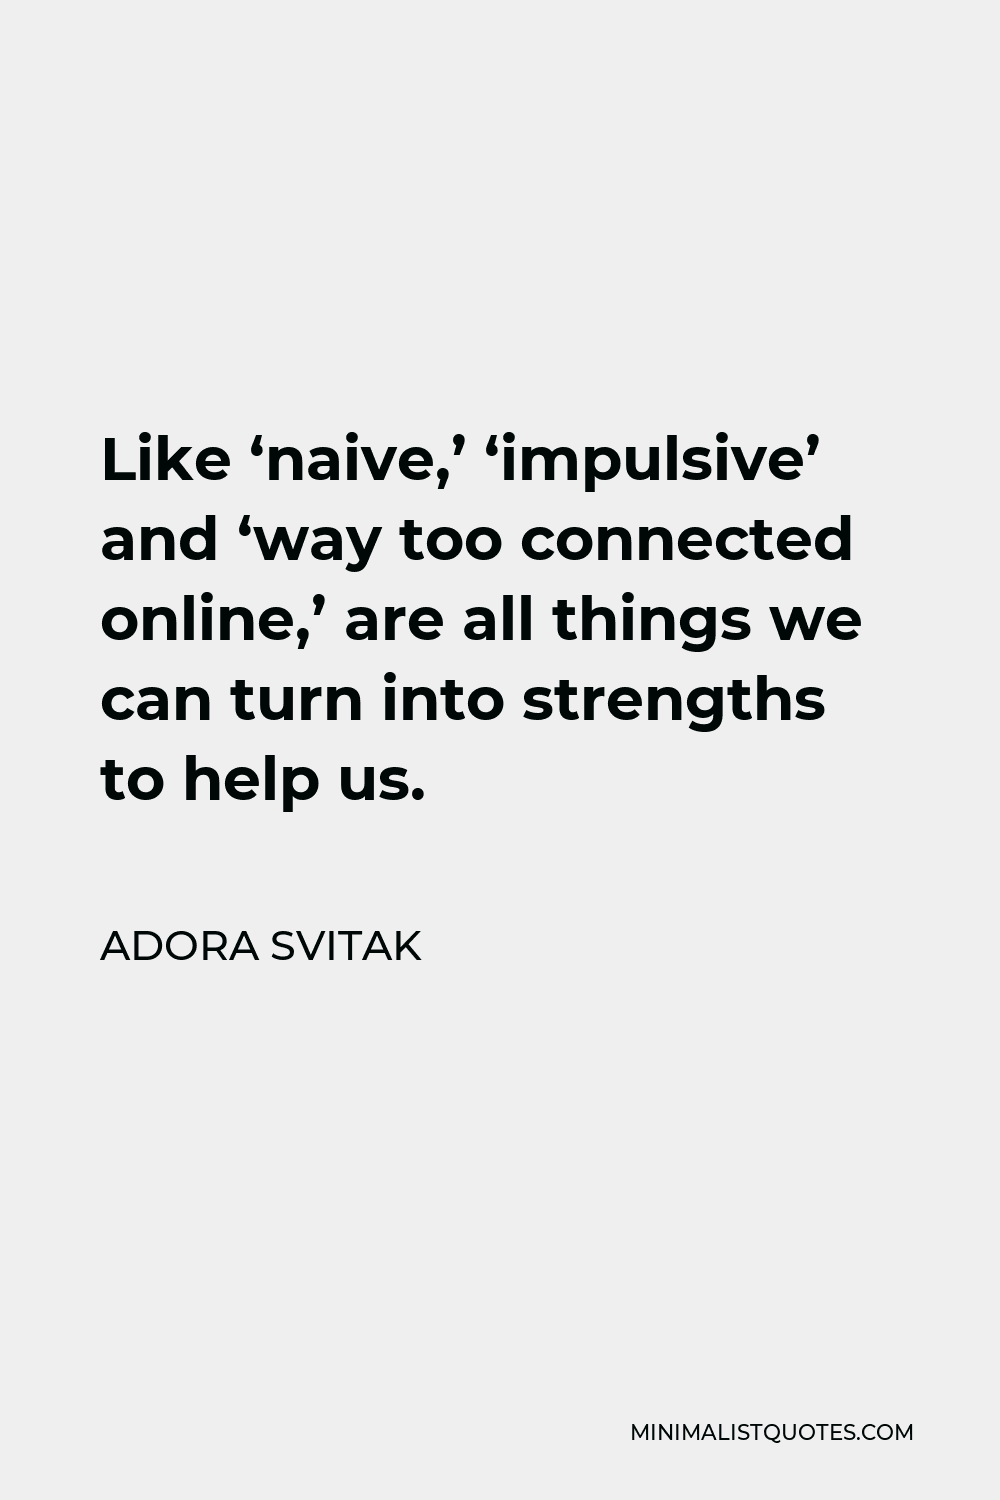 Adora Svitak Quote - Like ‘naive,’ ‘impulsive’ and ‘way too connected online,’ are all things we can turn into strengths to help us.